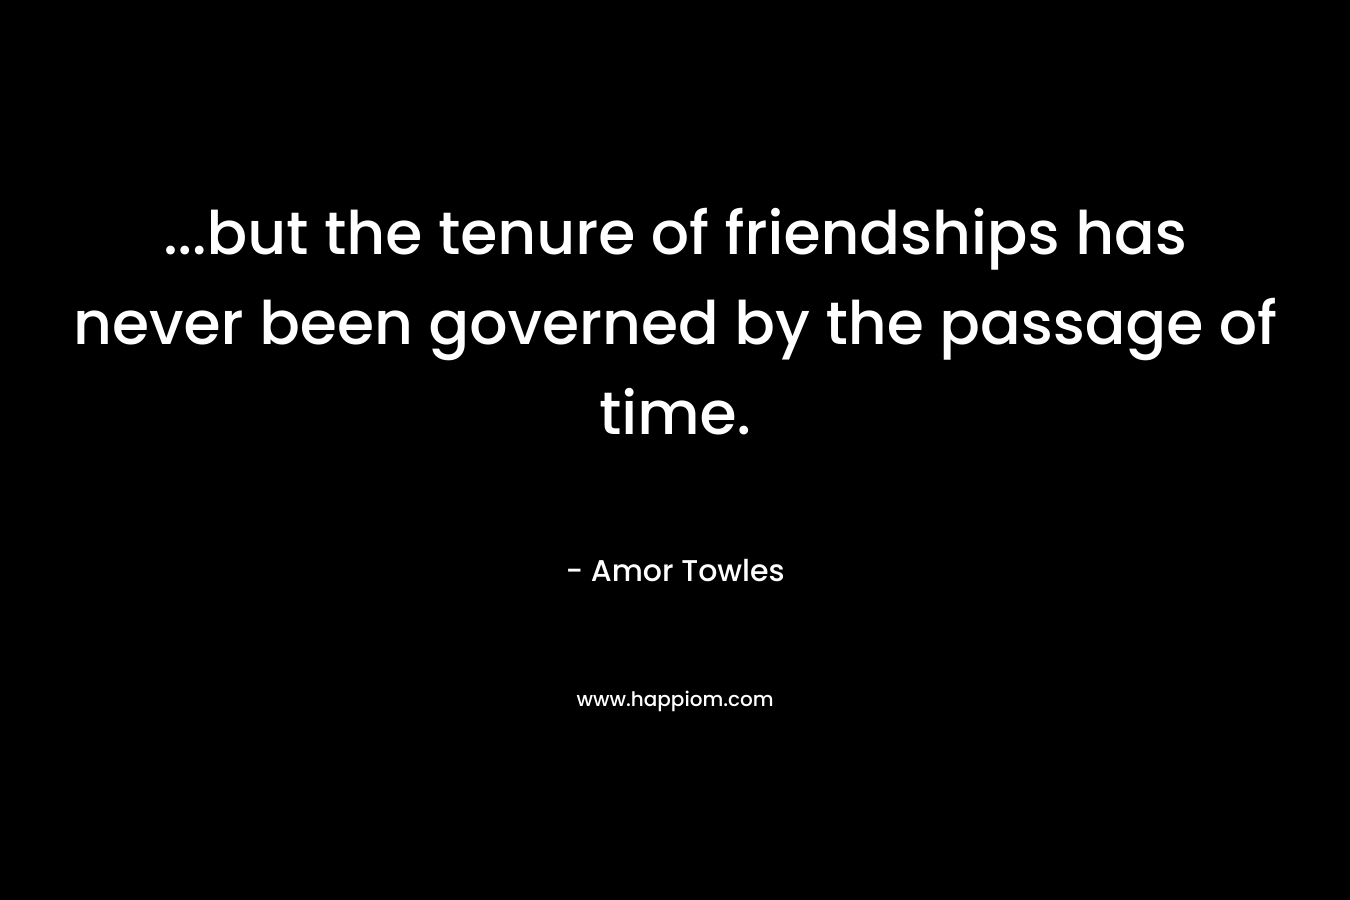 …but the tenure of friendships has never been governed by the passage of time. – Amor Towles